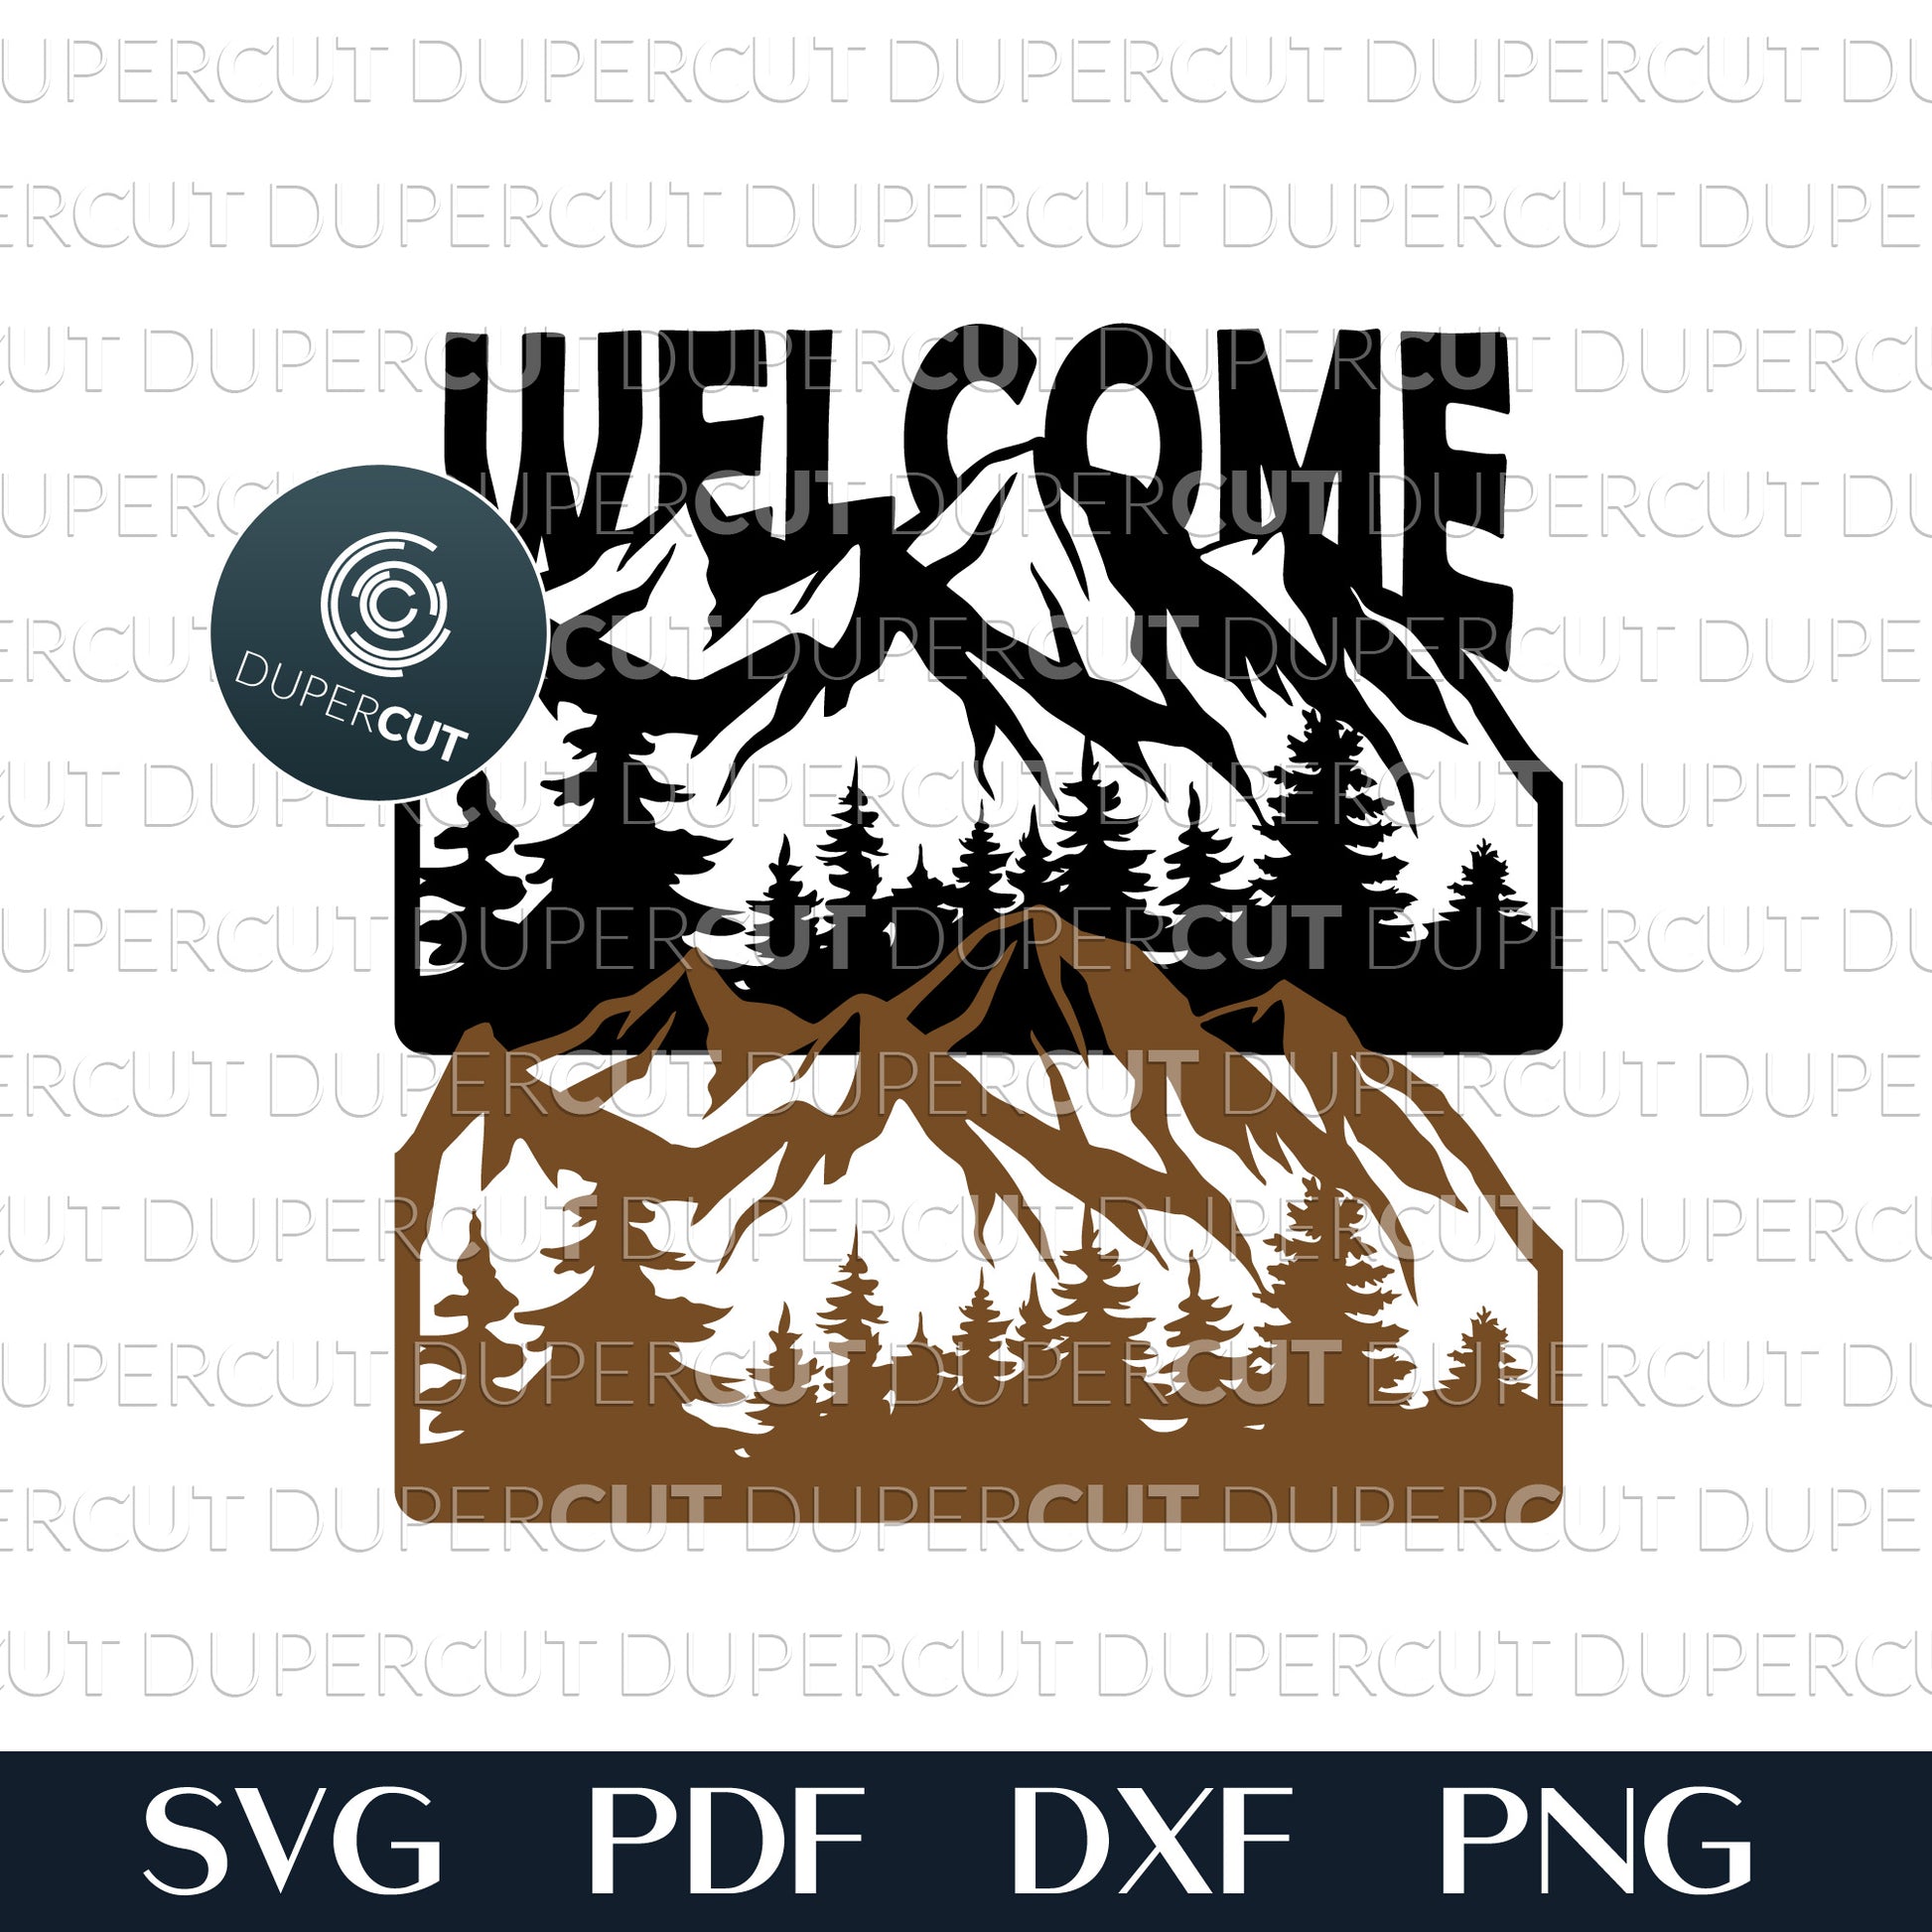 Wilderness mountains scene Welcome sign - cabin decoration - SVG PDF DXF files for laser cutting, engraving, Glowforge, Cricut, Silhouette Cameo, CNC plasma machines